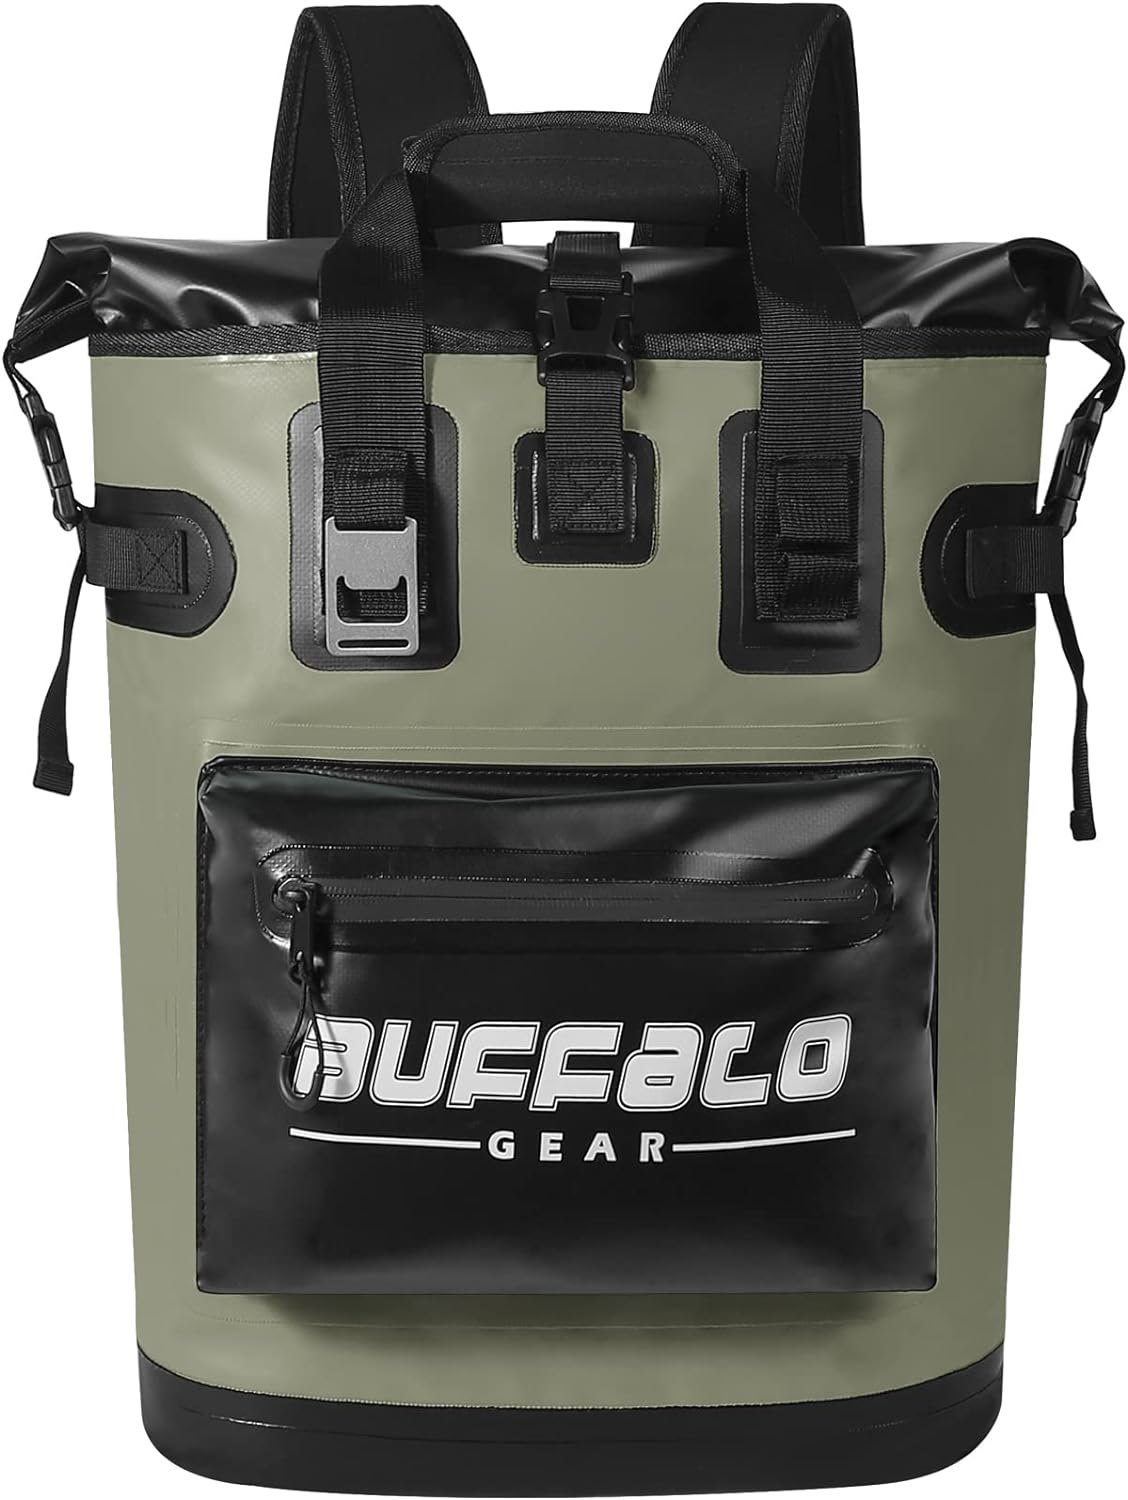 buffalo-gear-cooler-backpack18l30l-review